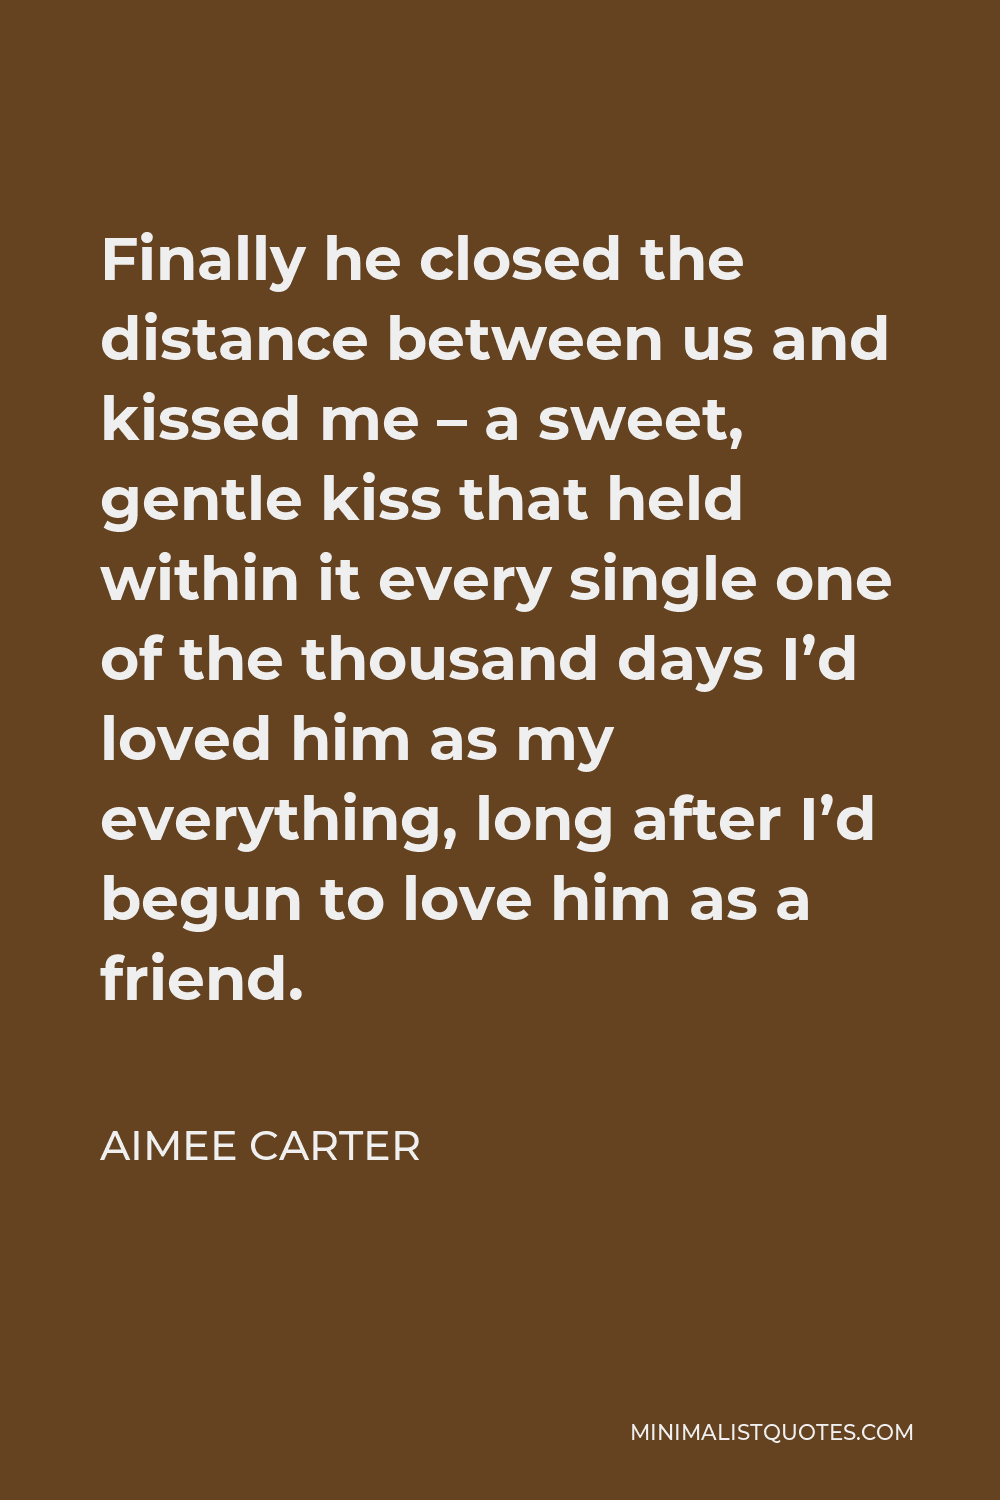 Aimee Carter Quote - Finally he closed the distance between us and kissed me – a sweet, gentle kiss that held within it every single one of the thousand days I’d loved him as my everything, long after I’d begun to love him as a friend.